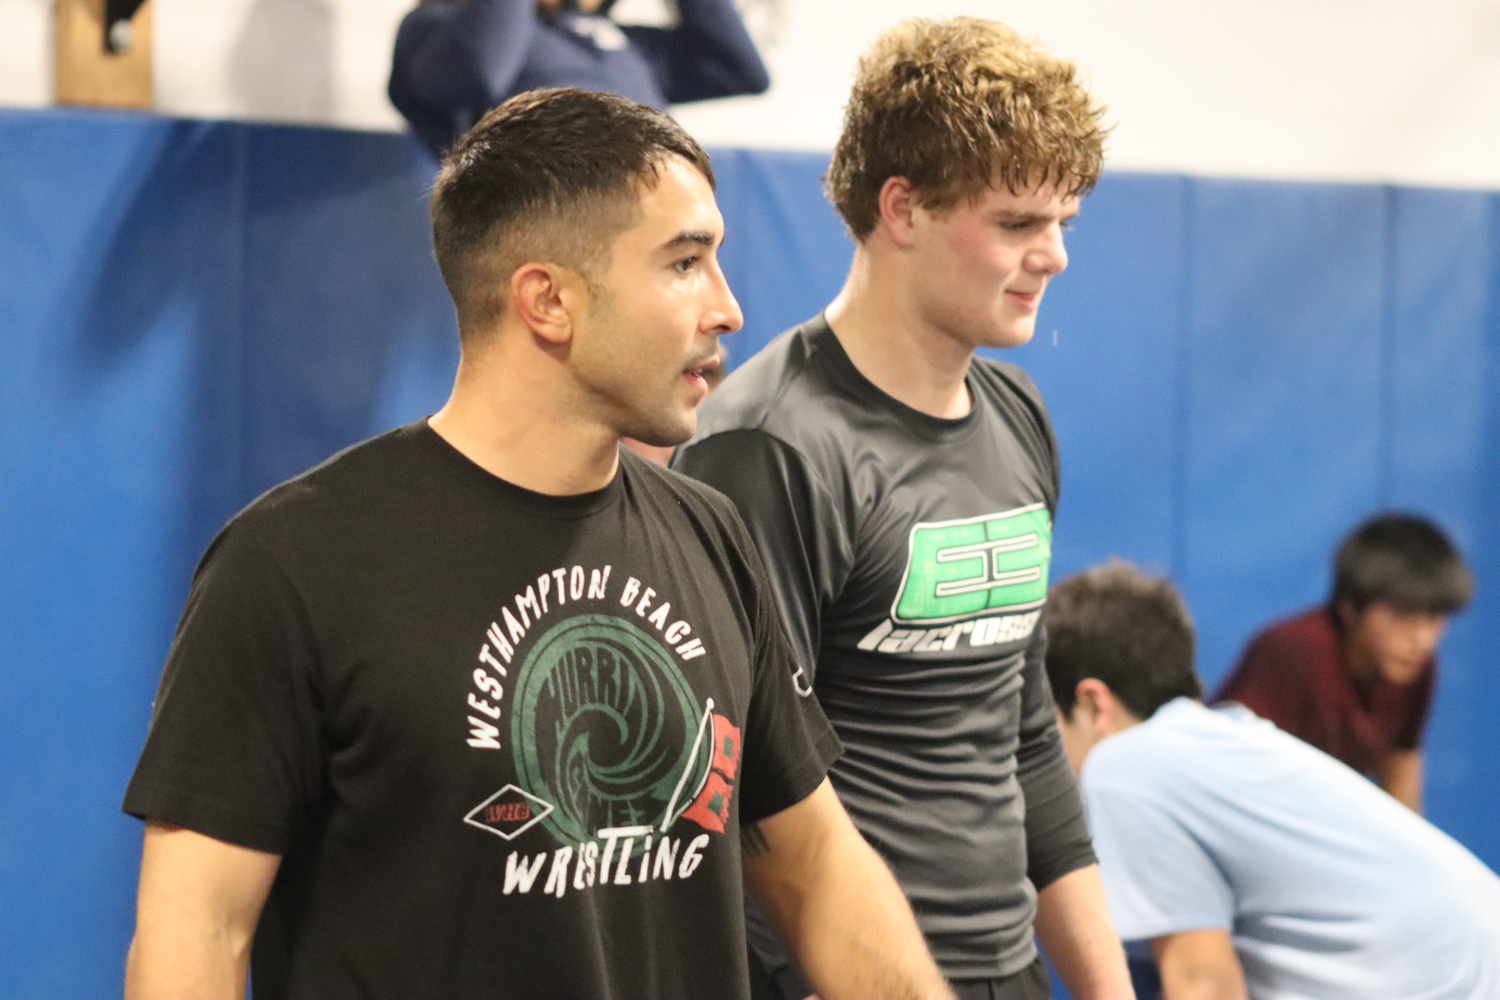 Jakob Restrepo, left, is the new head coach of the Westhampton Beach wrestling team. Restrepo, 26, was a state champion at Sachem East and went on to wrestle at the University of Maryland. CAILIN RILEY